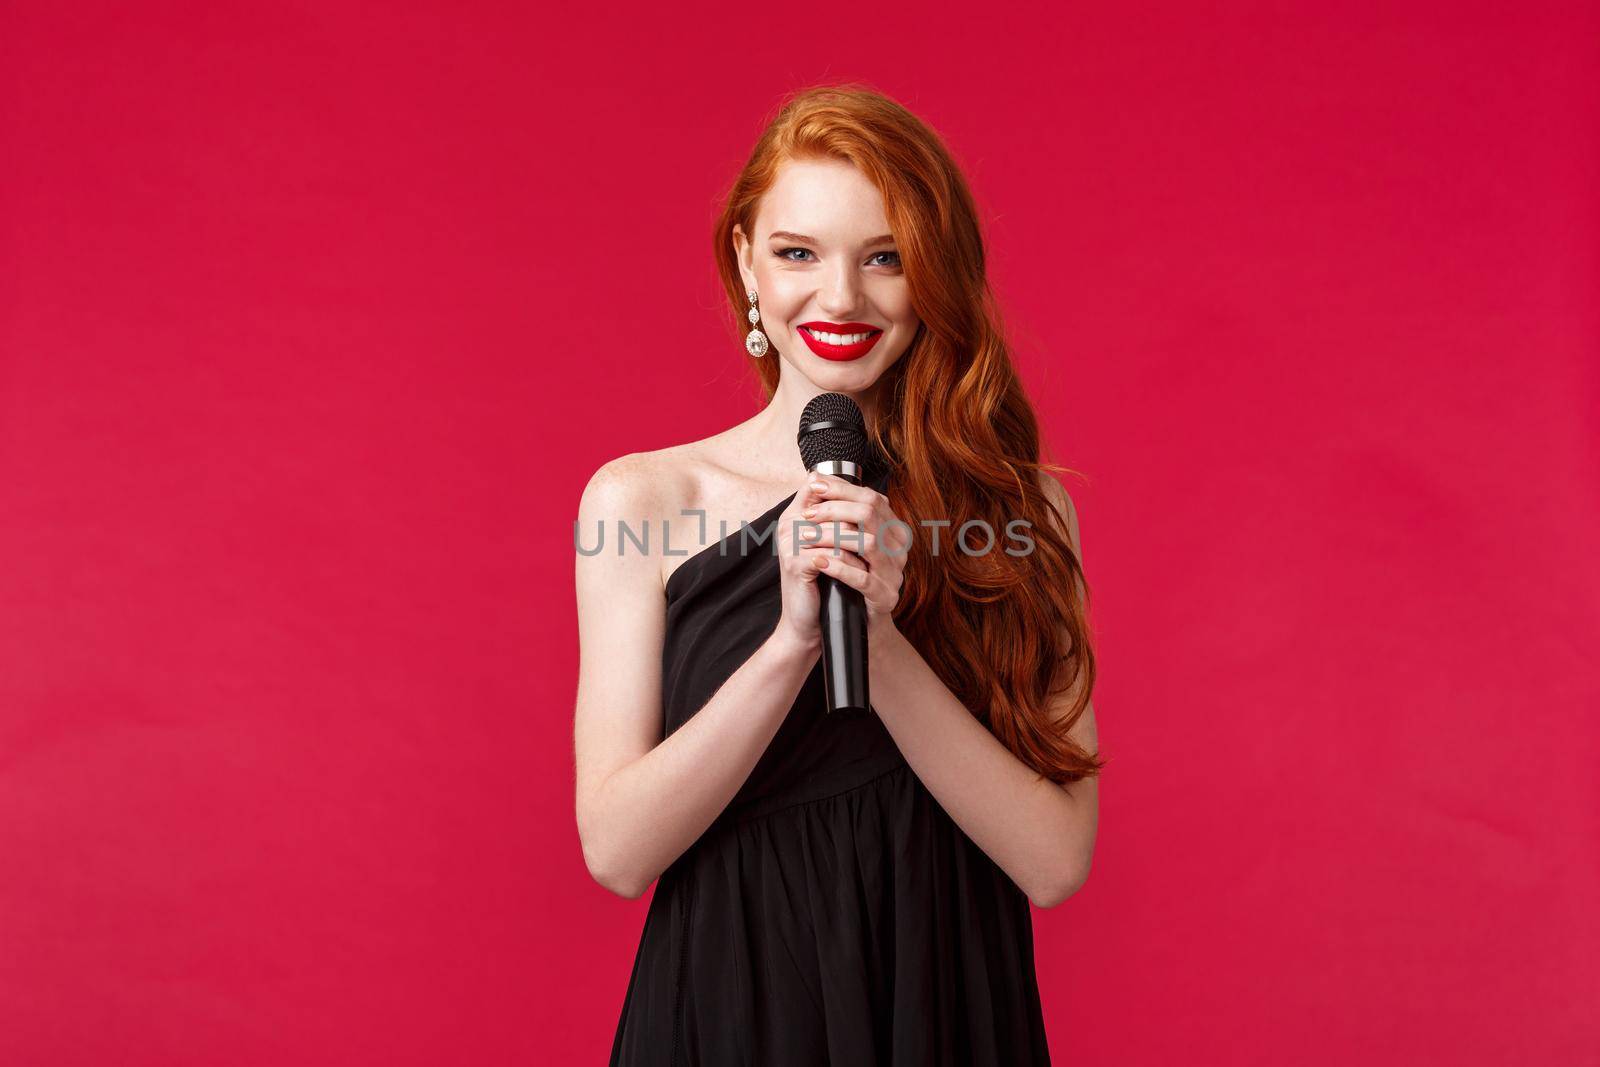 Portrait of elegant beautiful young woman with red long hair wearing evening dress, holding microphone, performer singing for clients in restaurant, smiling sensually, red background.